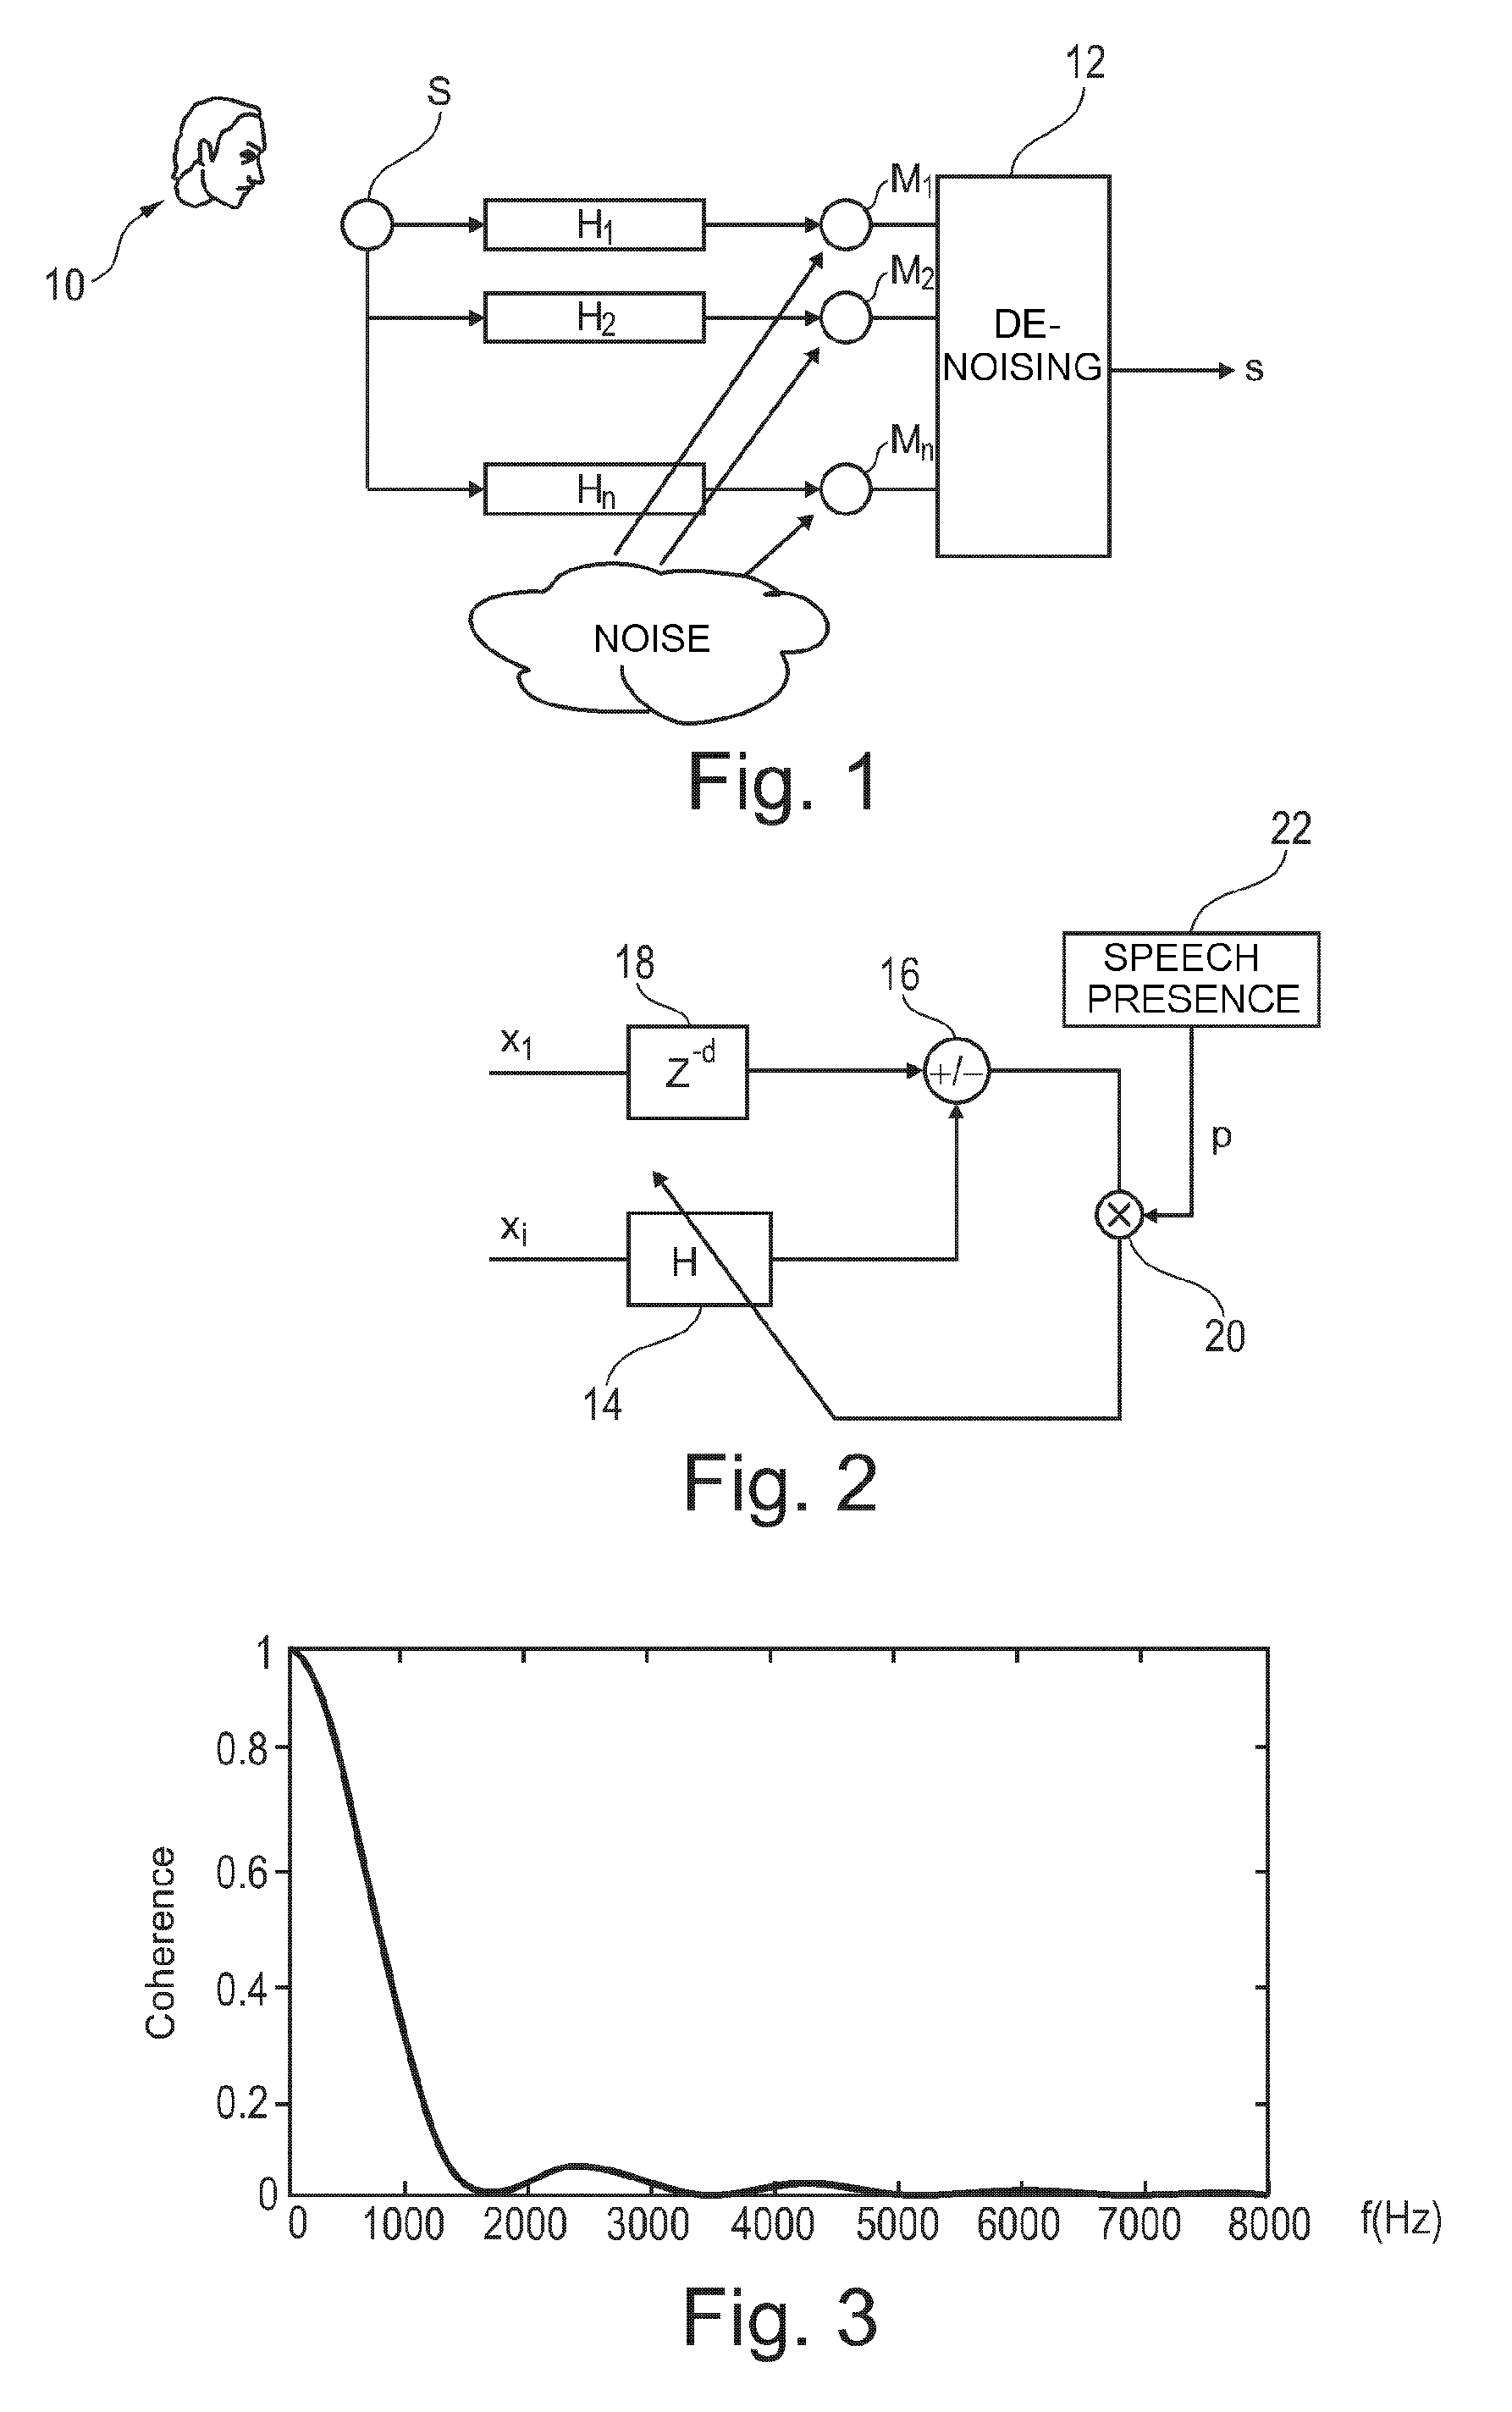 De-noising method for multi-microphone audio equipment, in particular for a "hands free" telephony system